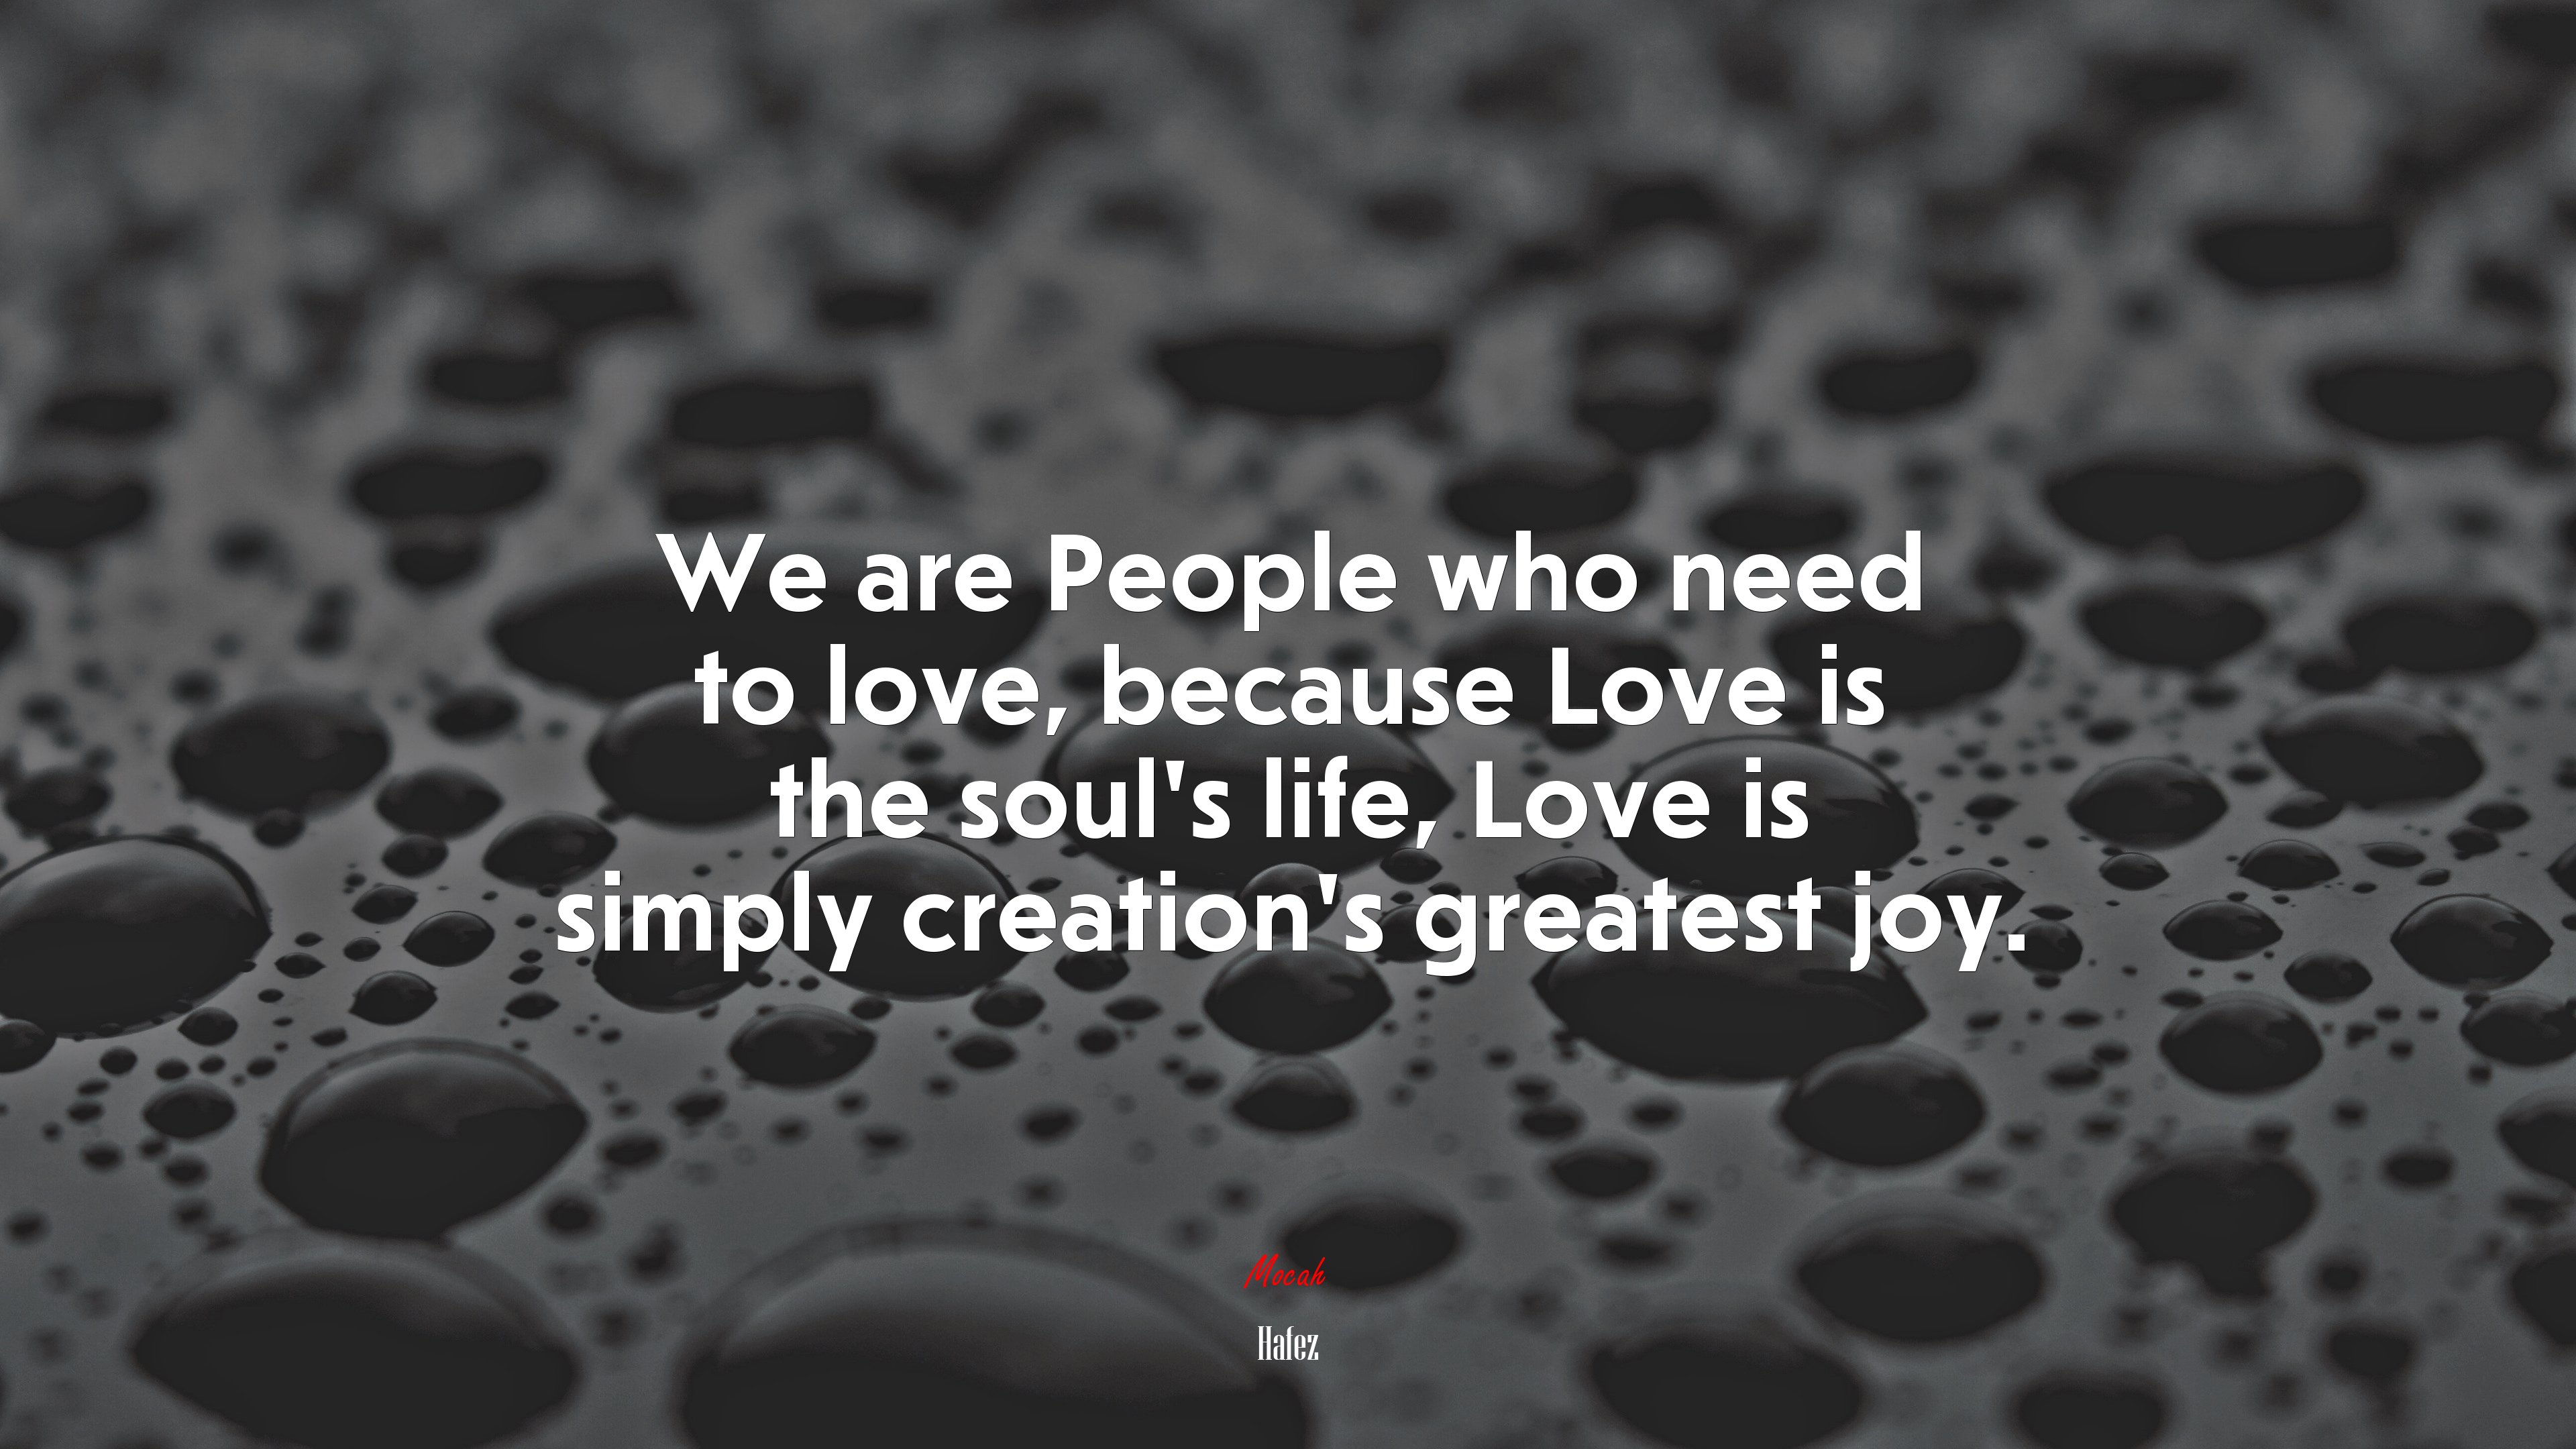 We are People who need to love, because Love is the soul's life, Love is simply creation's greatest joy. Hafez quote, 4k wallpaper. Mocah HD Wallpaper